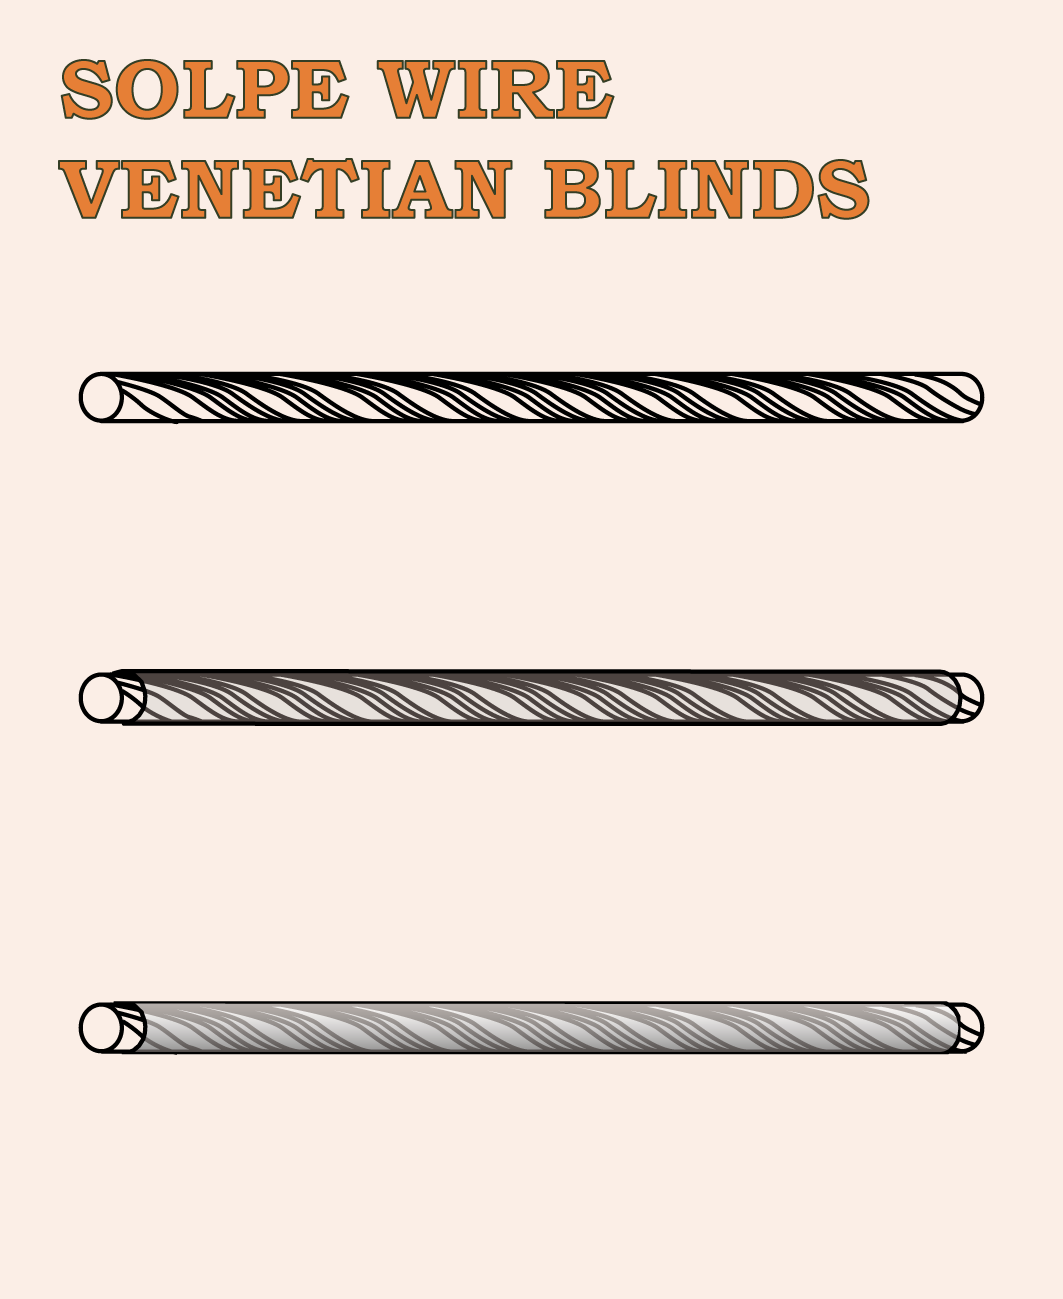 SOLPE WIRE VENETIAN BLINDS